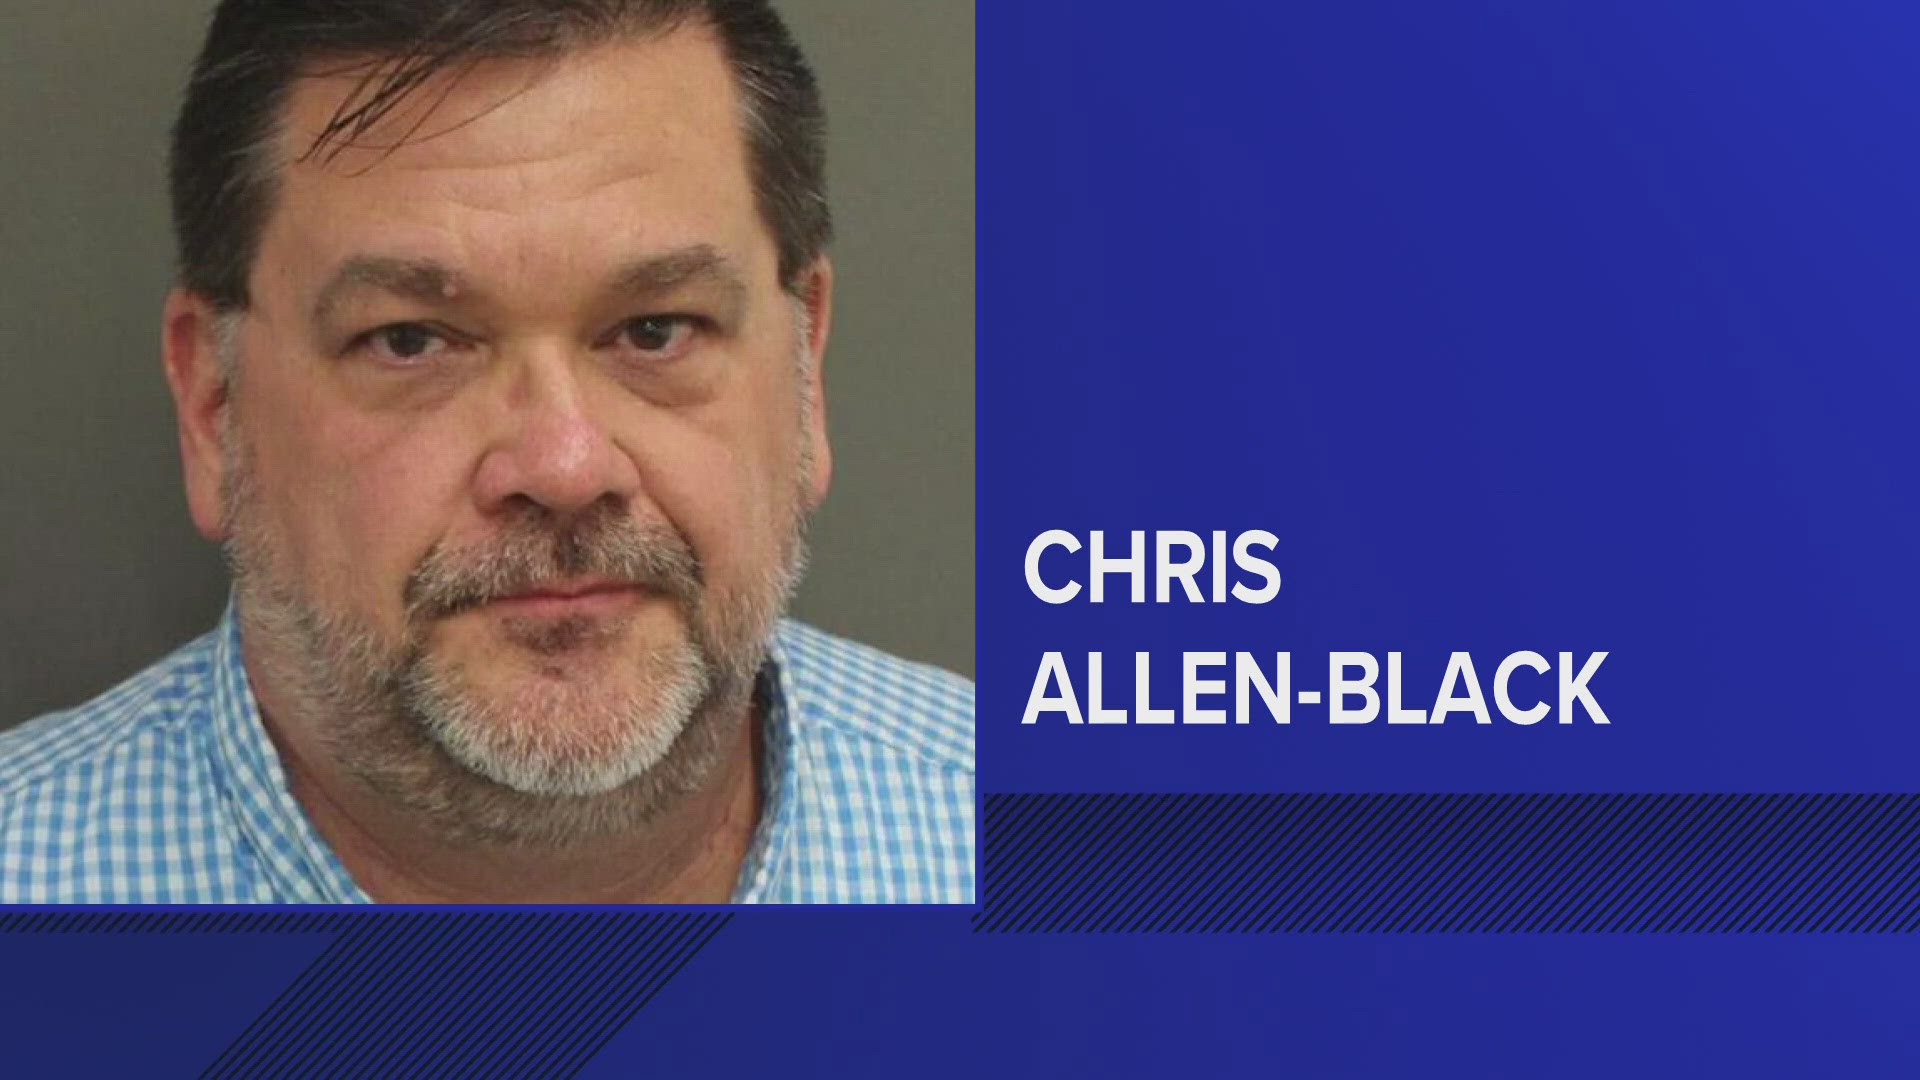 Chris Allen-Black was removed from the classroom 45 days after DCPS learned about his arrest. The district said it should have removed him immediately.